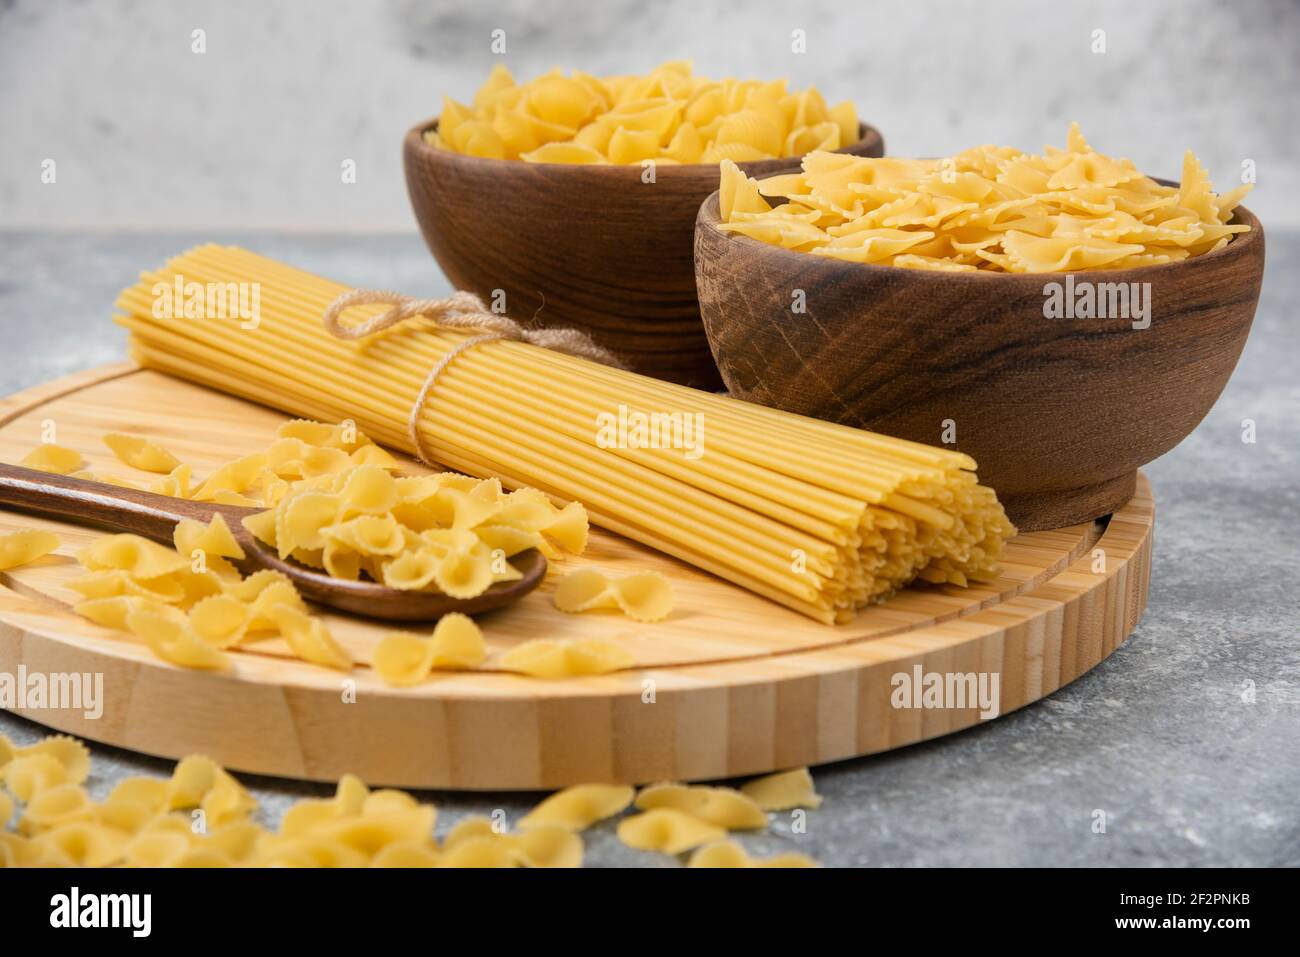 Bowls of raw dry pasta and spaghetti on marble surface Stock Photo